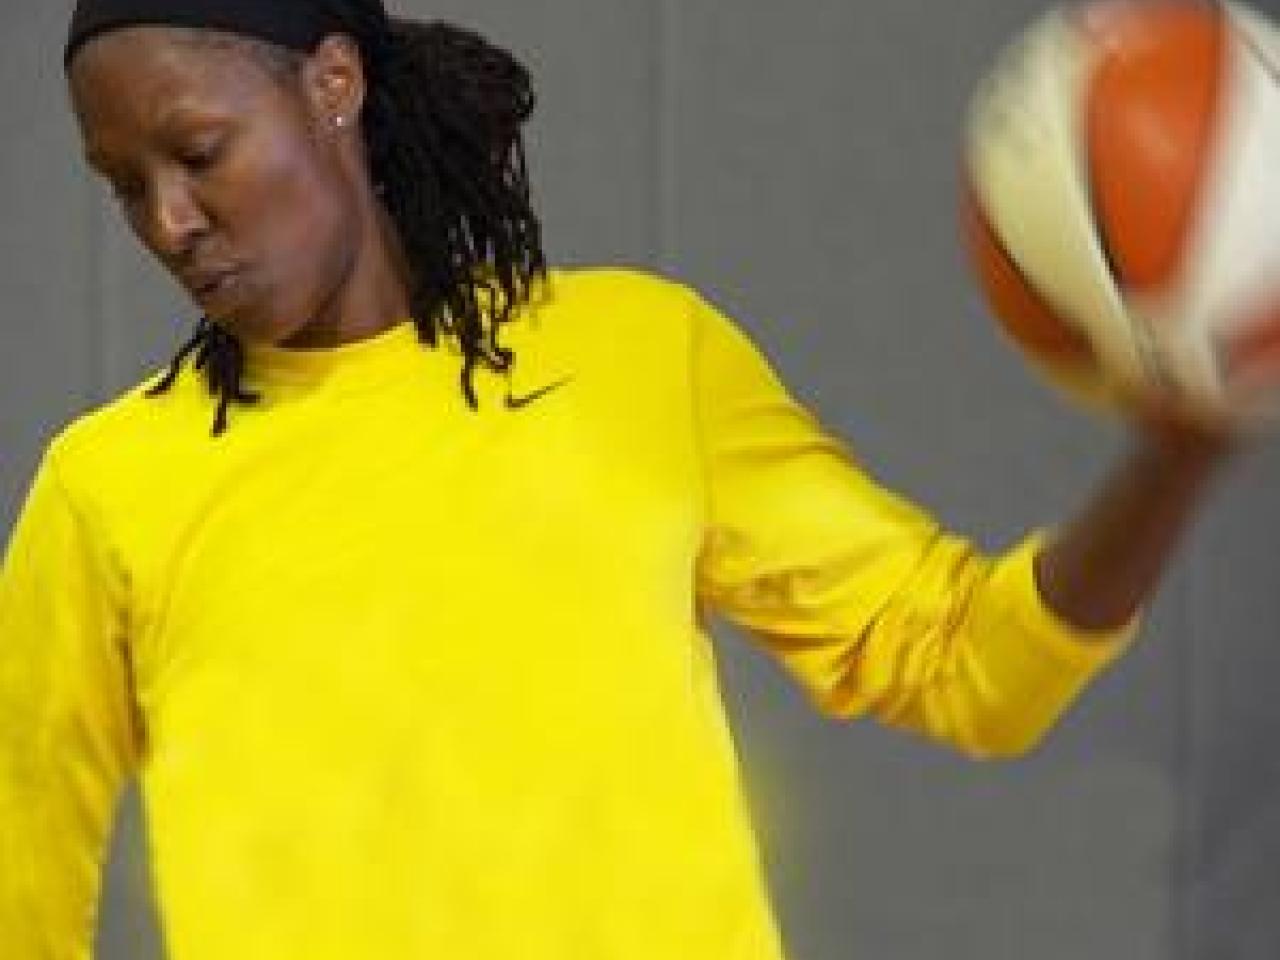 Chamique Holdsclaw, an African-American woman with her locs pulled back looks intently toward the ground, lips pursed. She wears a bright yellow Nike long-sleeved shirt and holds a basketball aloft in one hand.